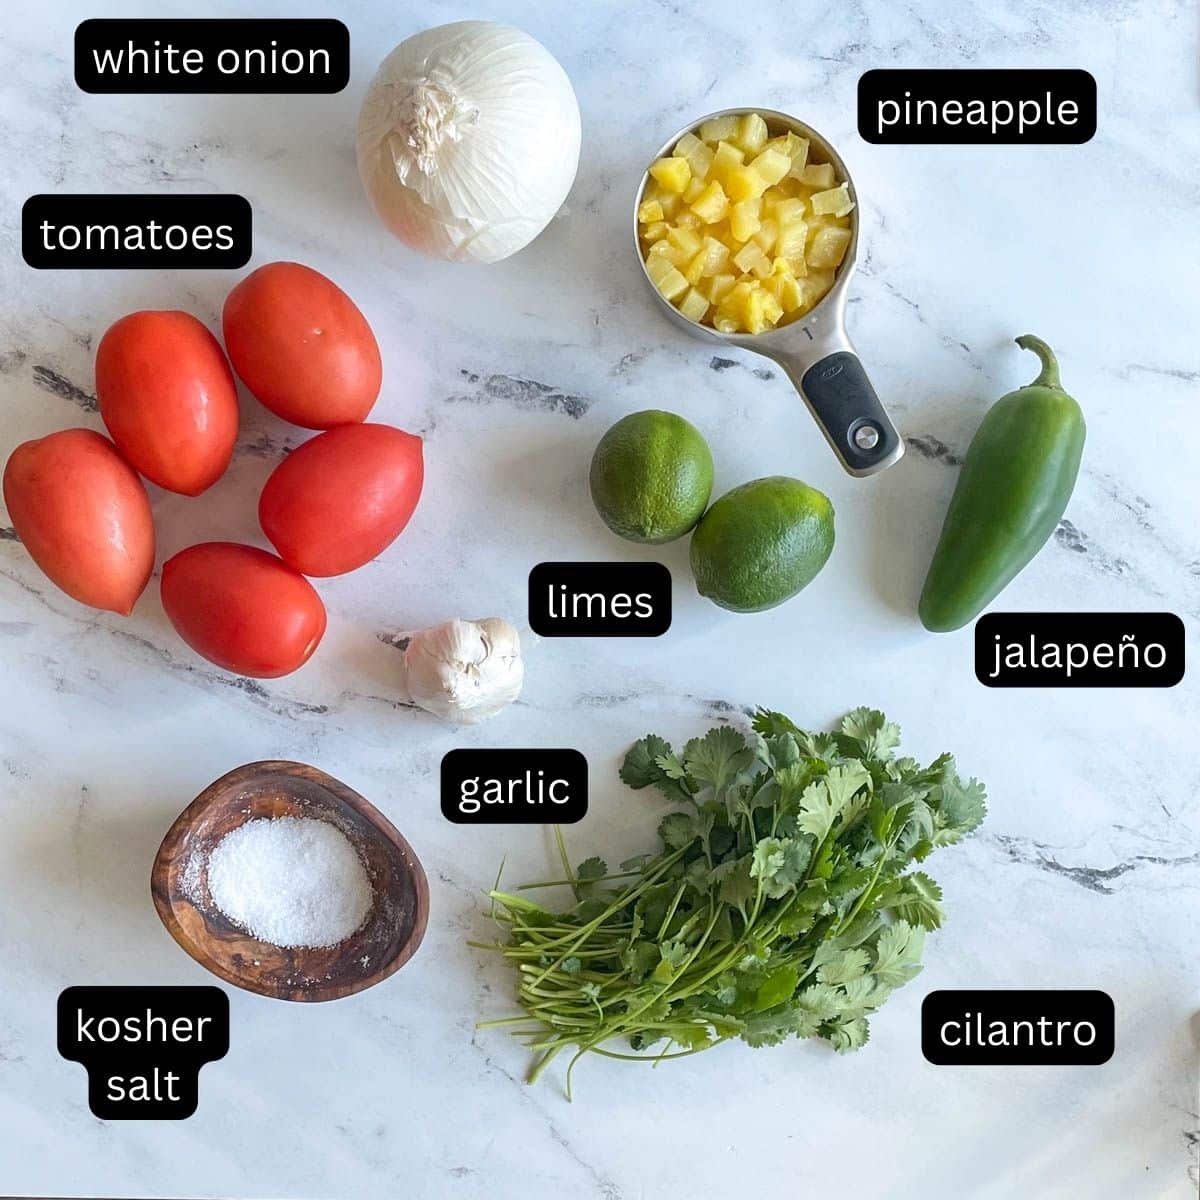 Labeled ingredients for pineapple pico de gallo sit on a white marble counter.